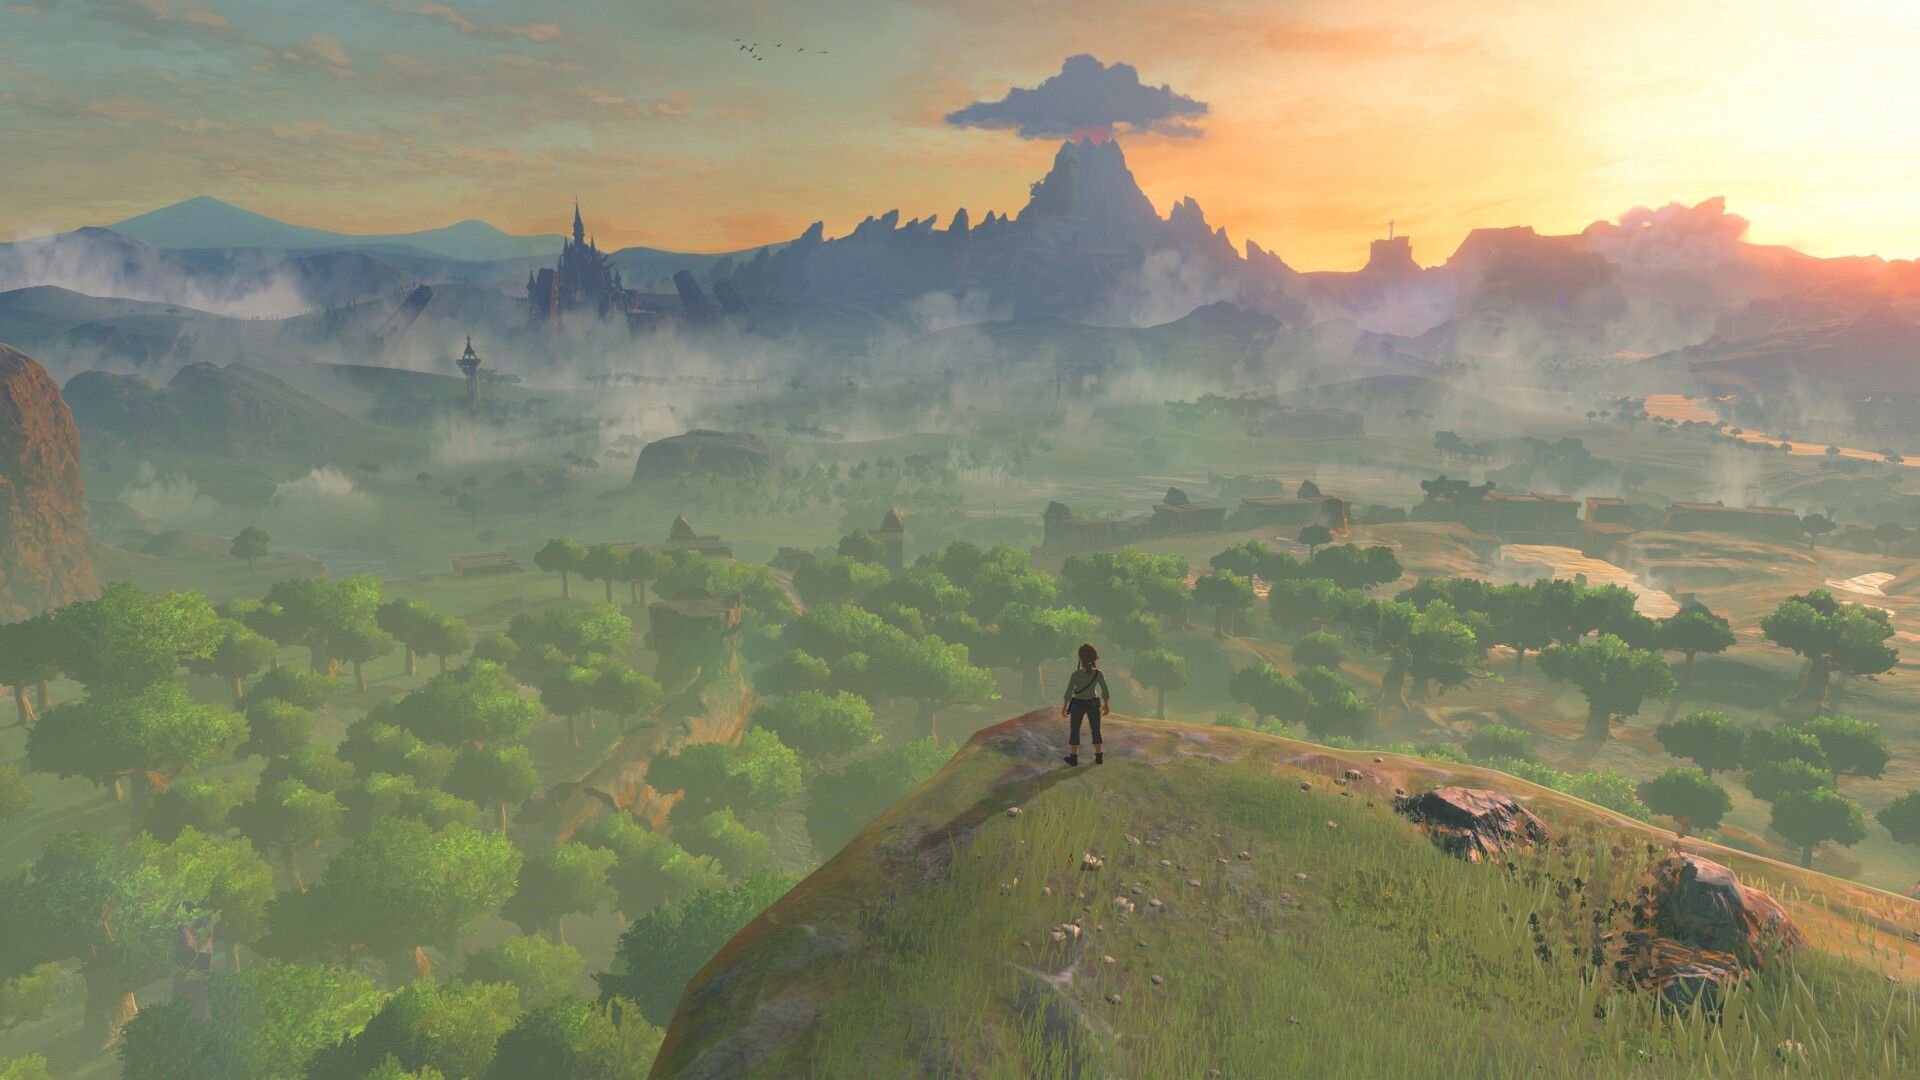 A screenshot from The Legend of Zelda: Breath of the Wild